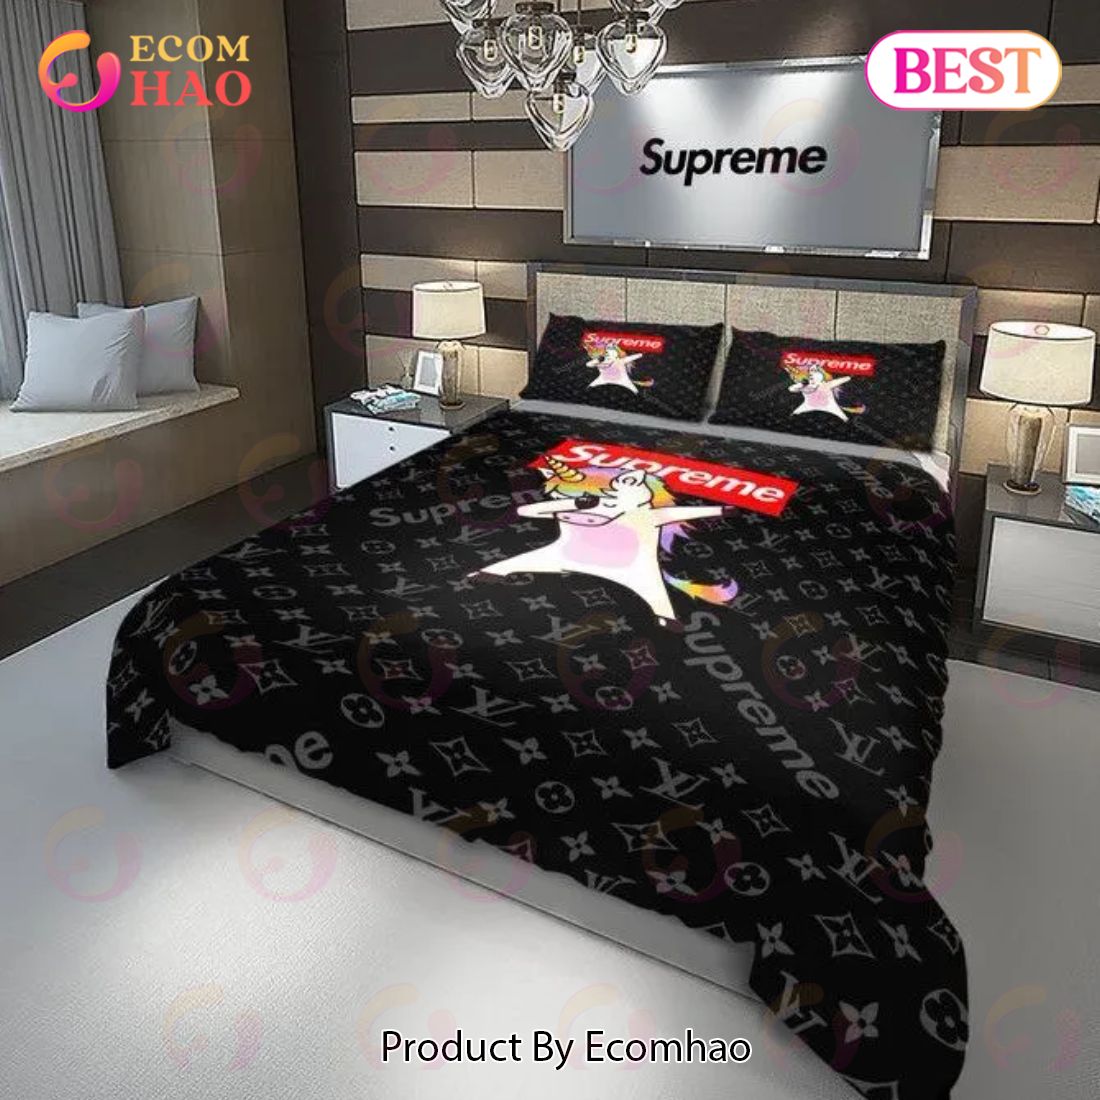 Louis Vuitton Supreme Unicorn Luxury Brand Bedding Set For Bedroom Luxury  Bedspread Duvet Cover Set With Pillowcases Home Decoration - Ecomhao Store